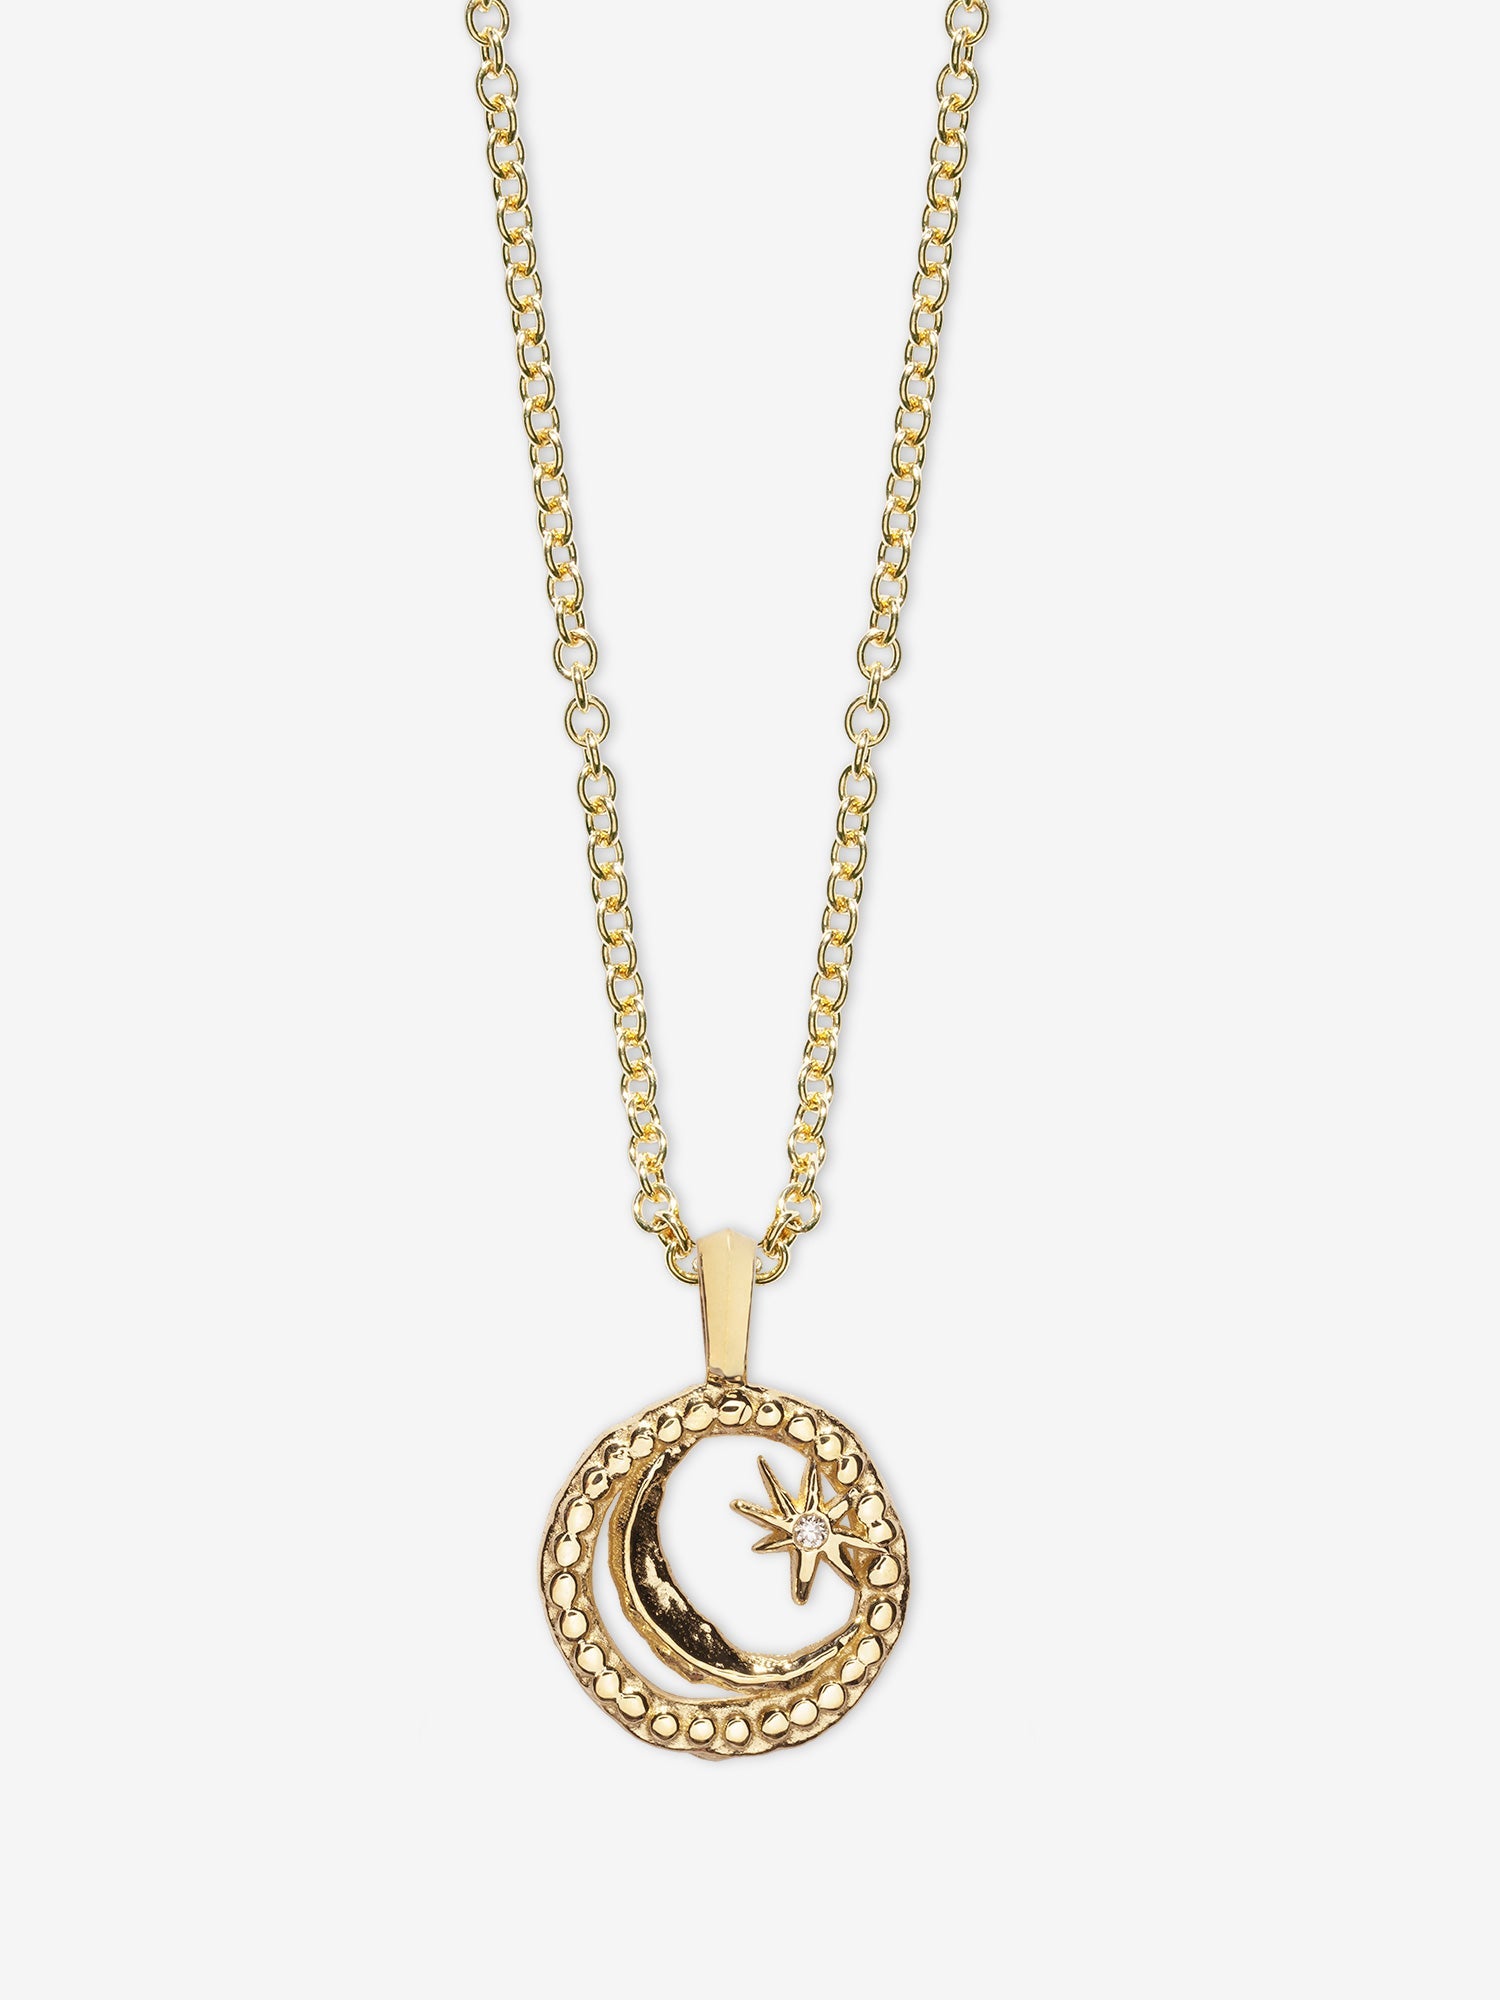 Petite Cosmic Coin Necklace